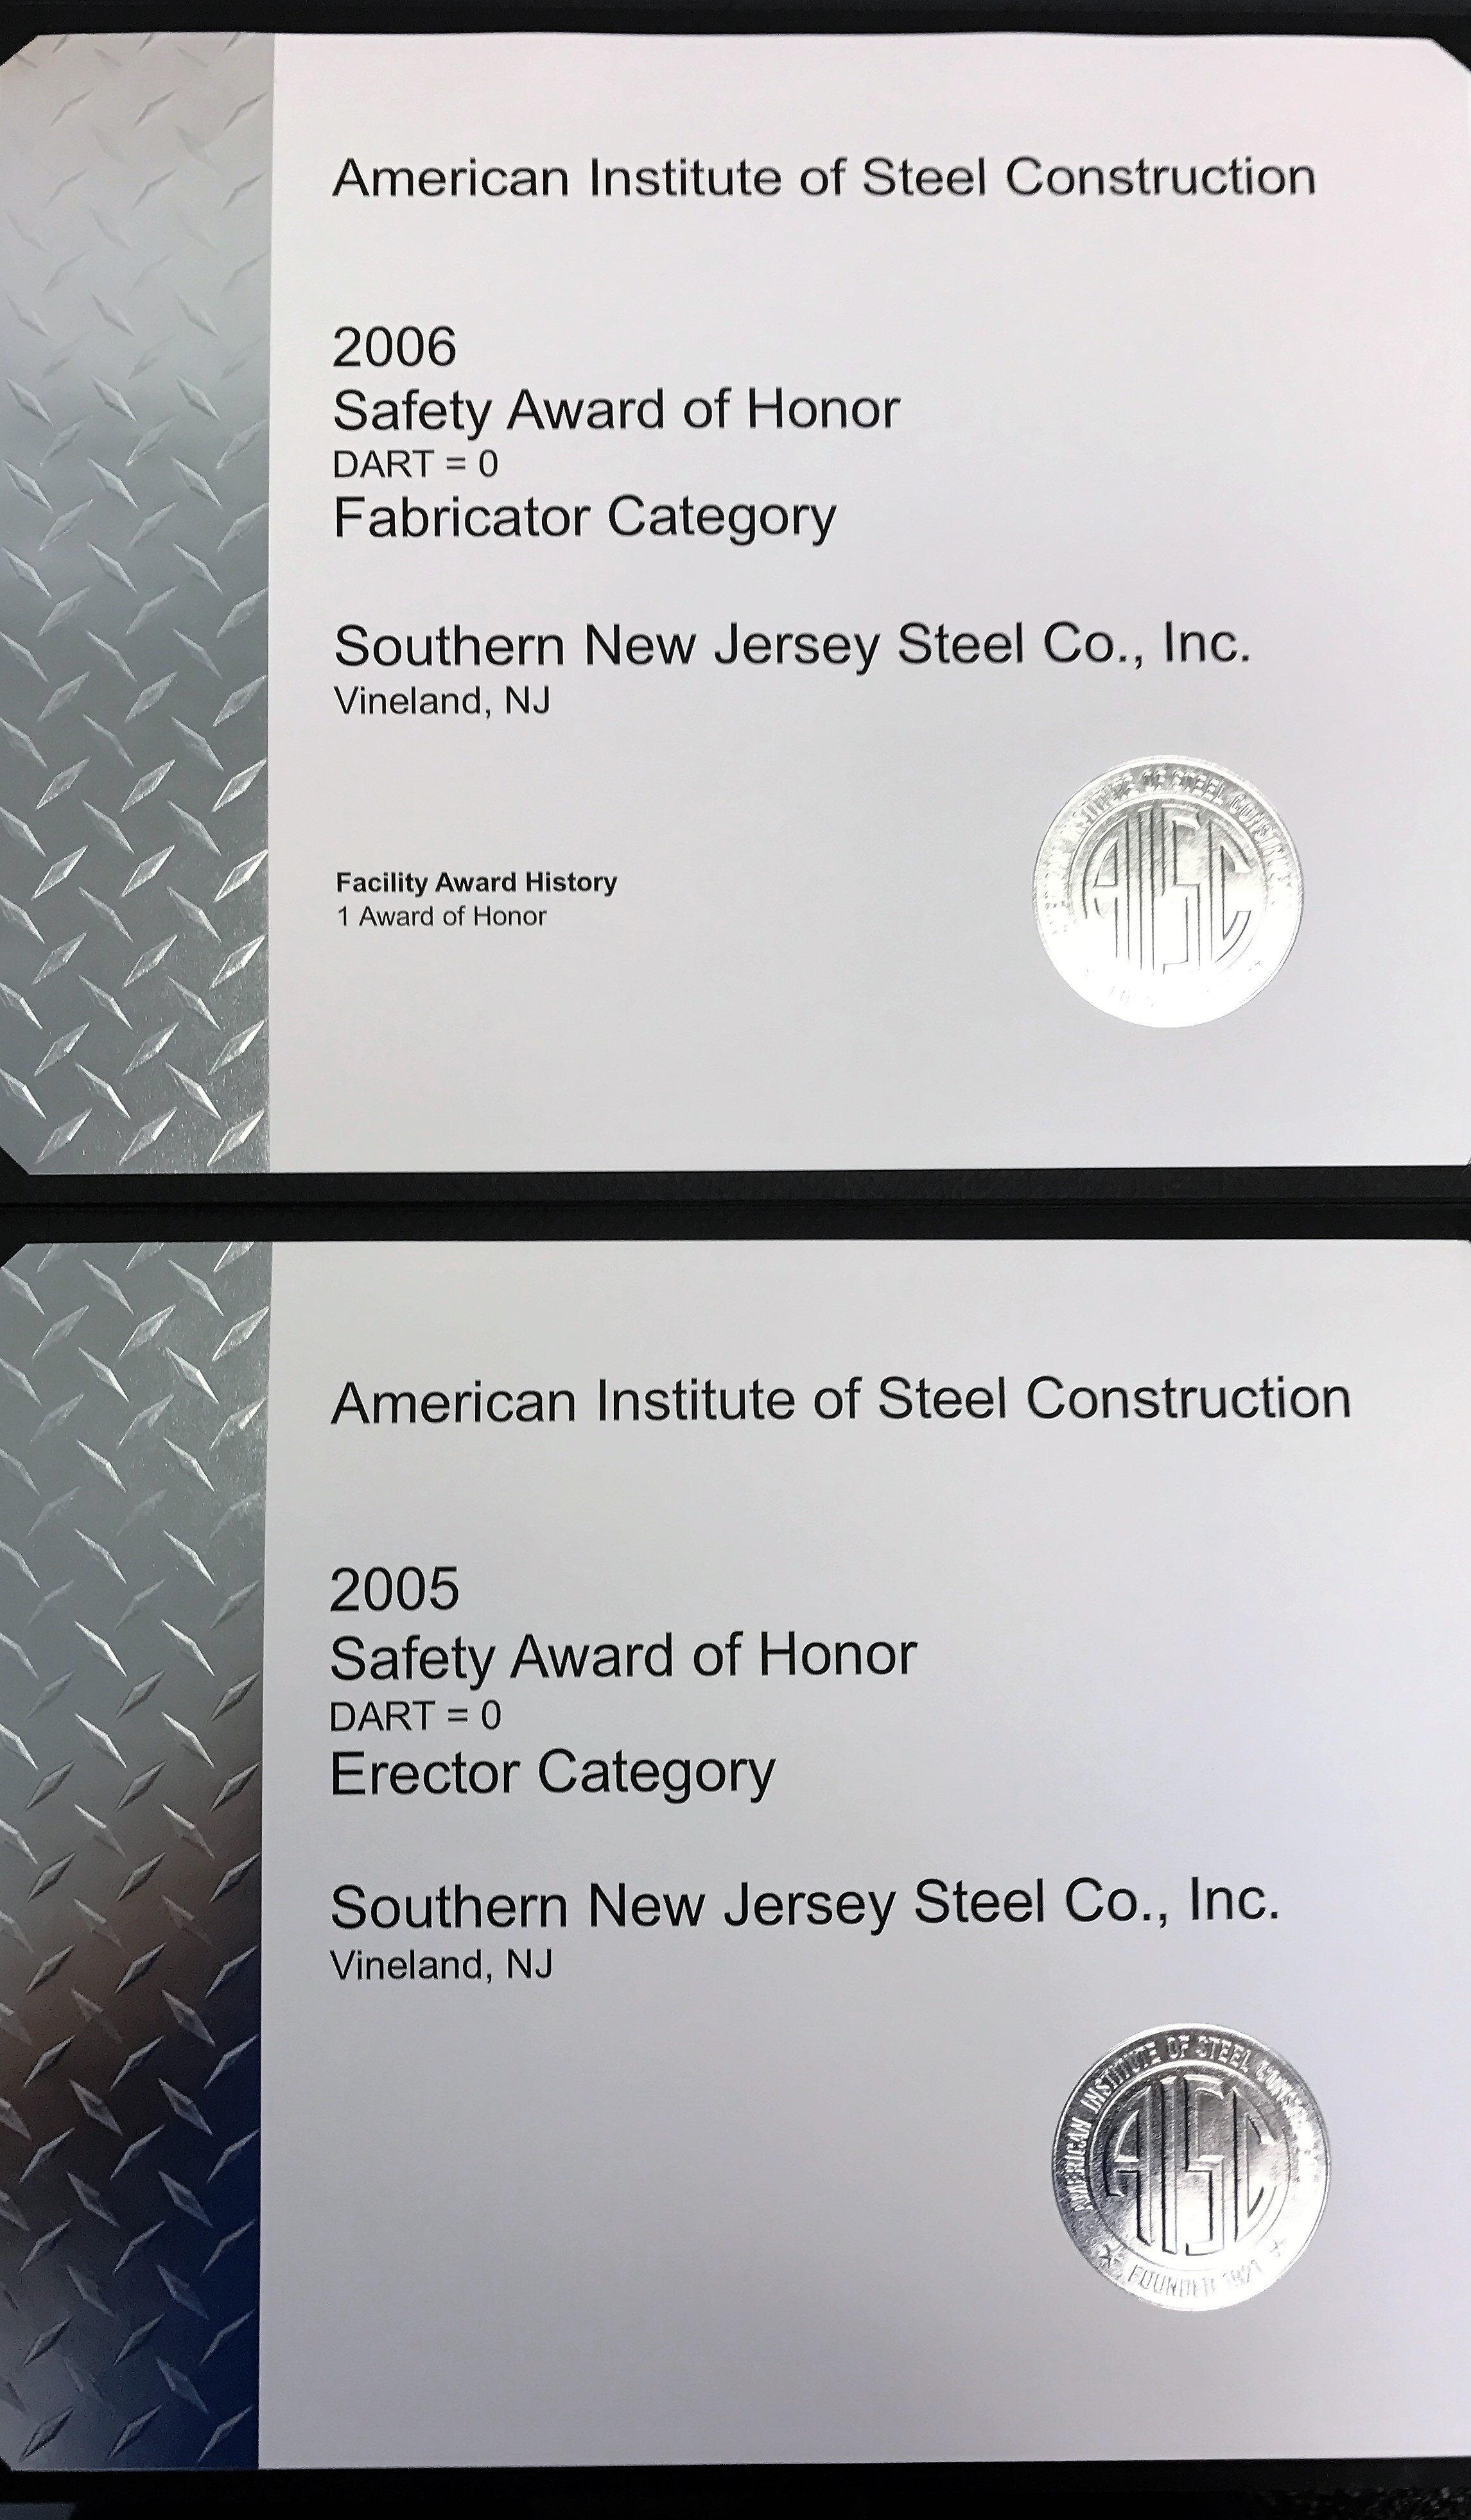 Snjs Receives Aisc Safety Award 2 Years In A Row Snjs Southern New